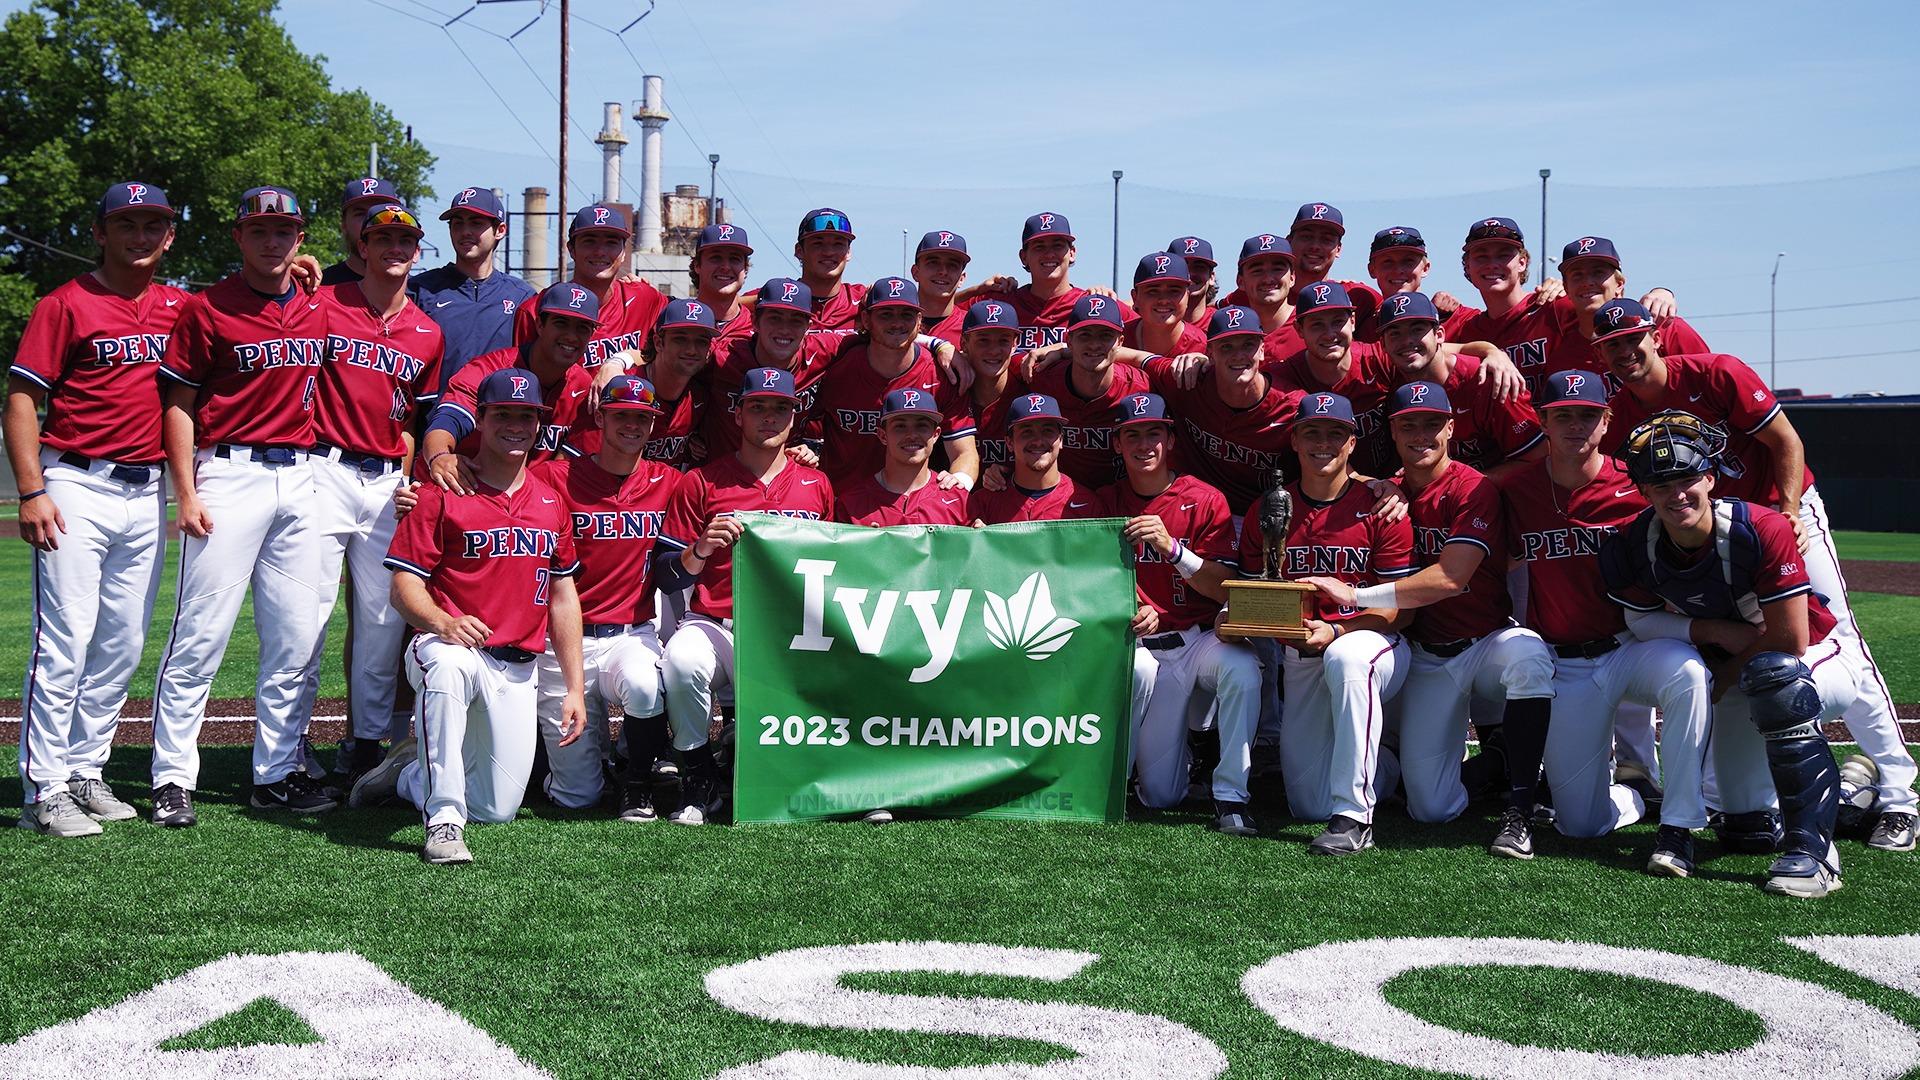 the baseball team posed behind banner, ivy 2023 champions